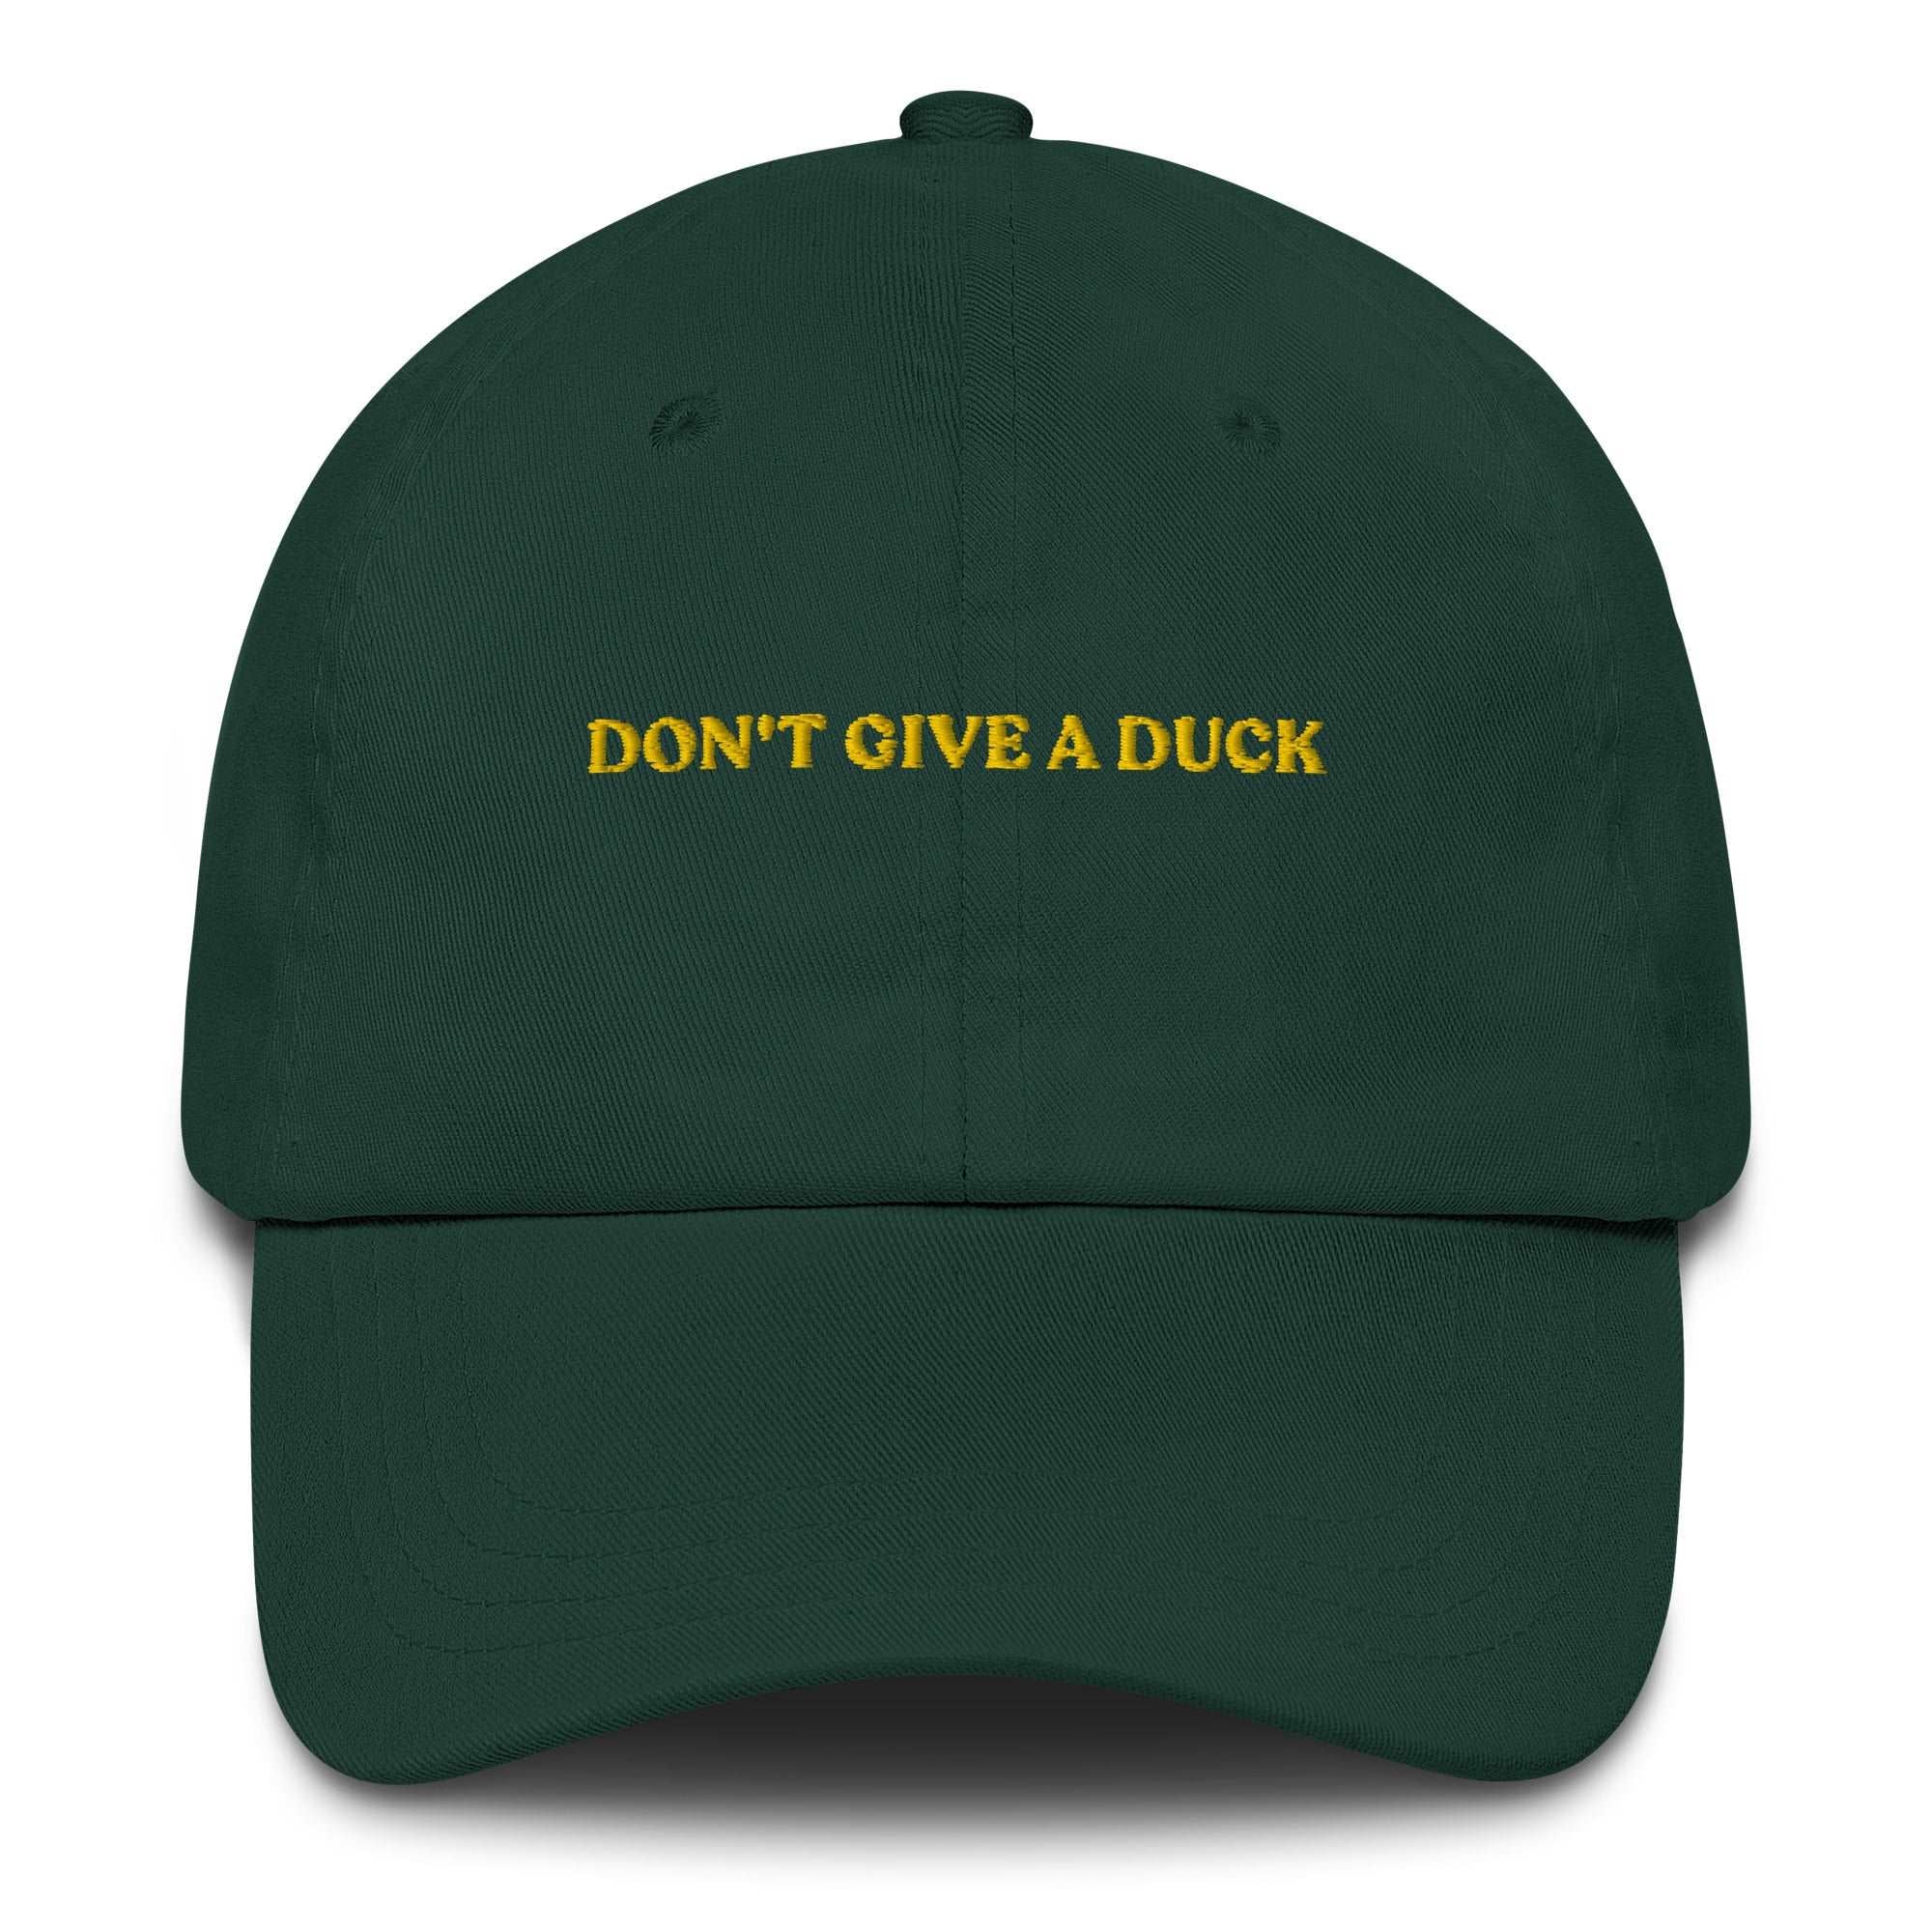 Don't give a duck